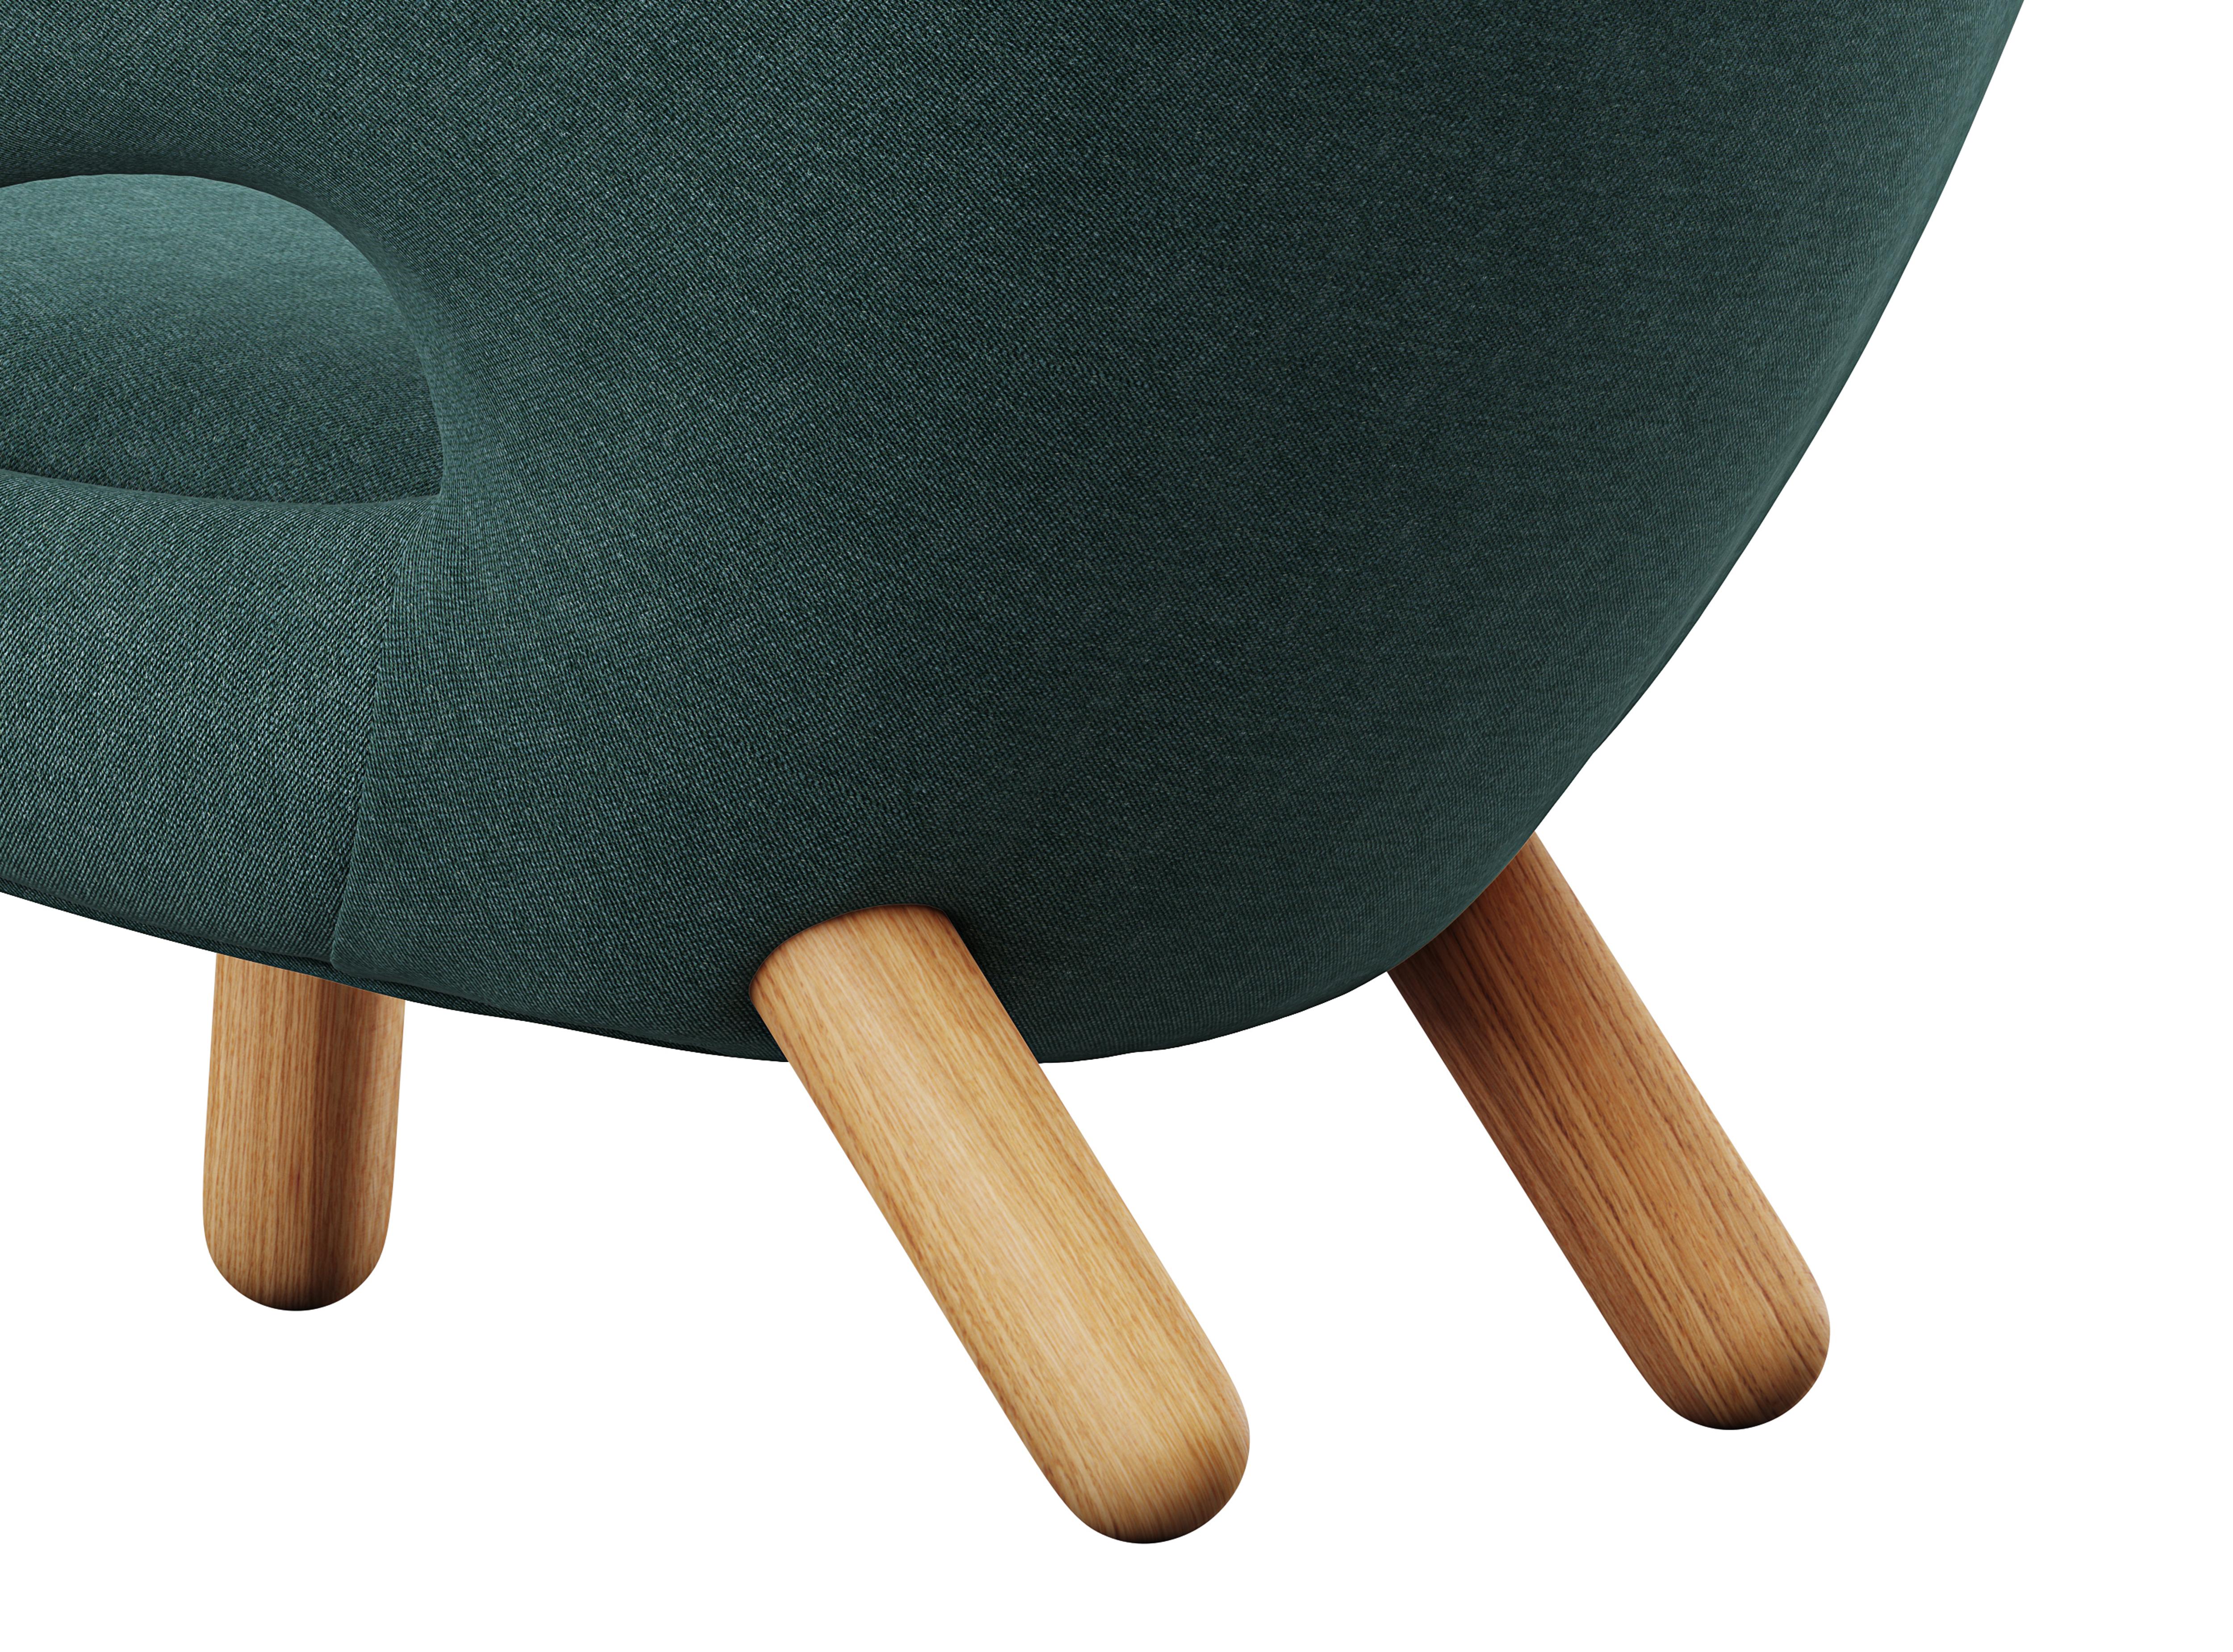 Finn Juhl Pelican Chair Upholstered in Wood and Fabric 3